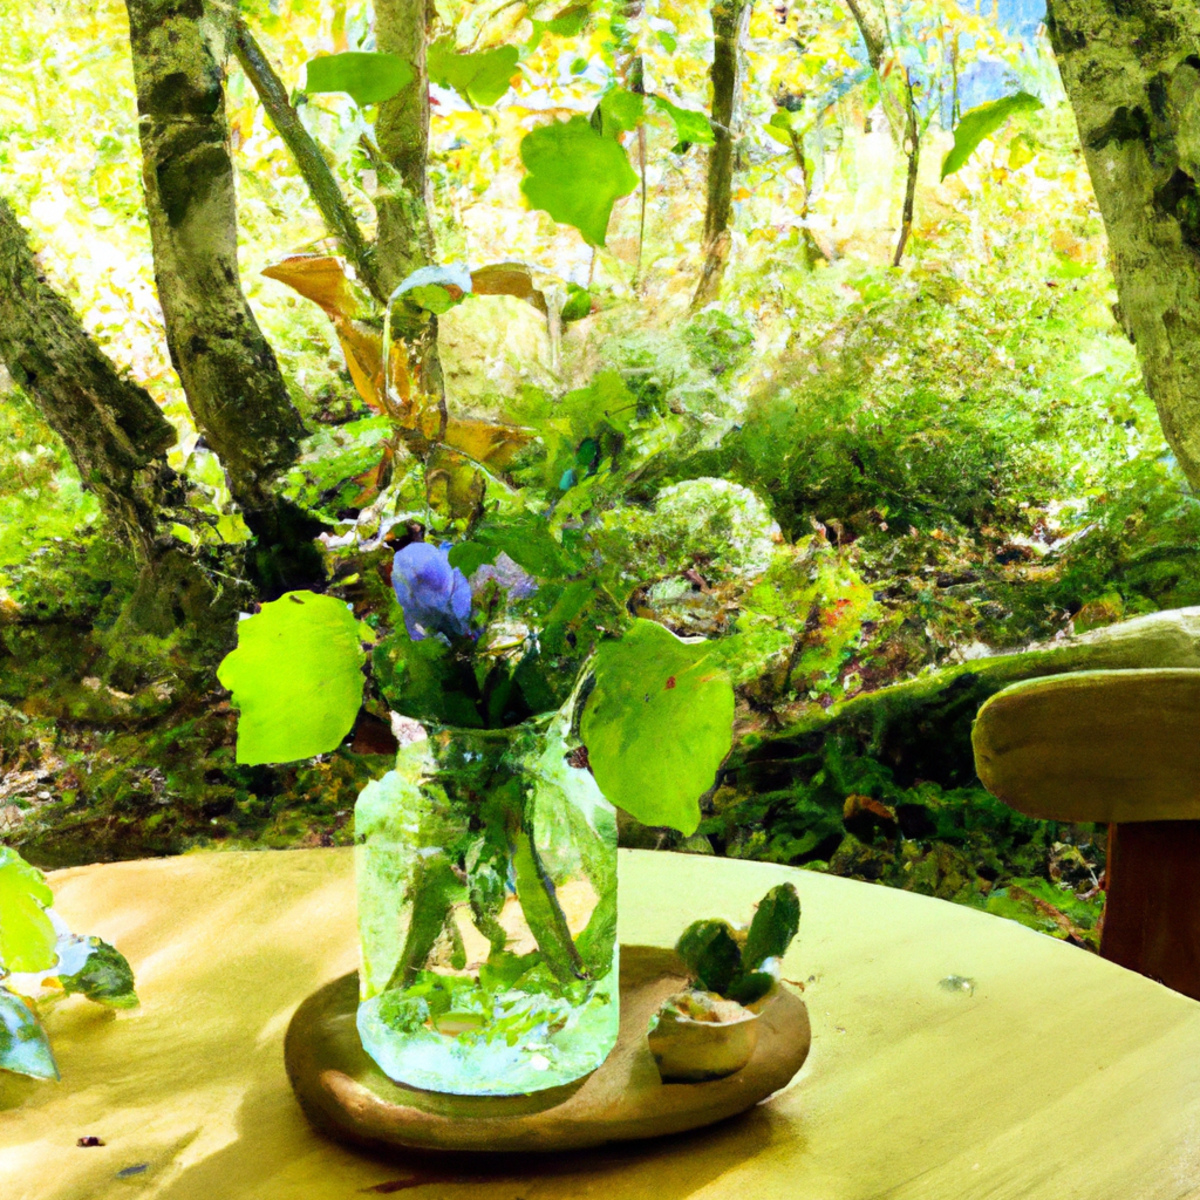 Serene forest scene with holistic self-care objects: wildflowers, books on mindfulness, river stone, and herbal tea.